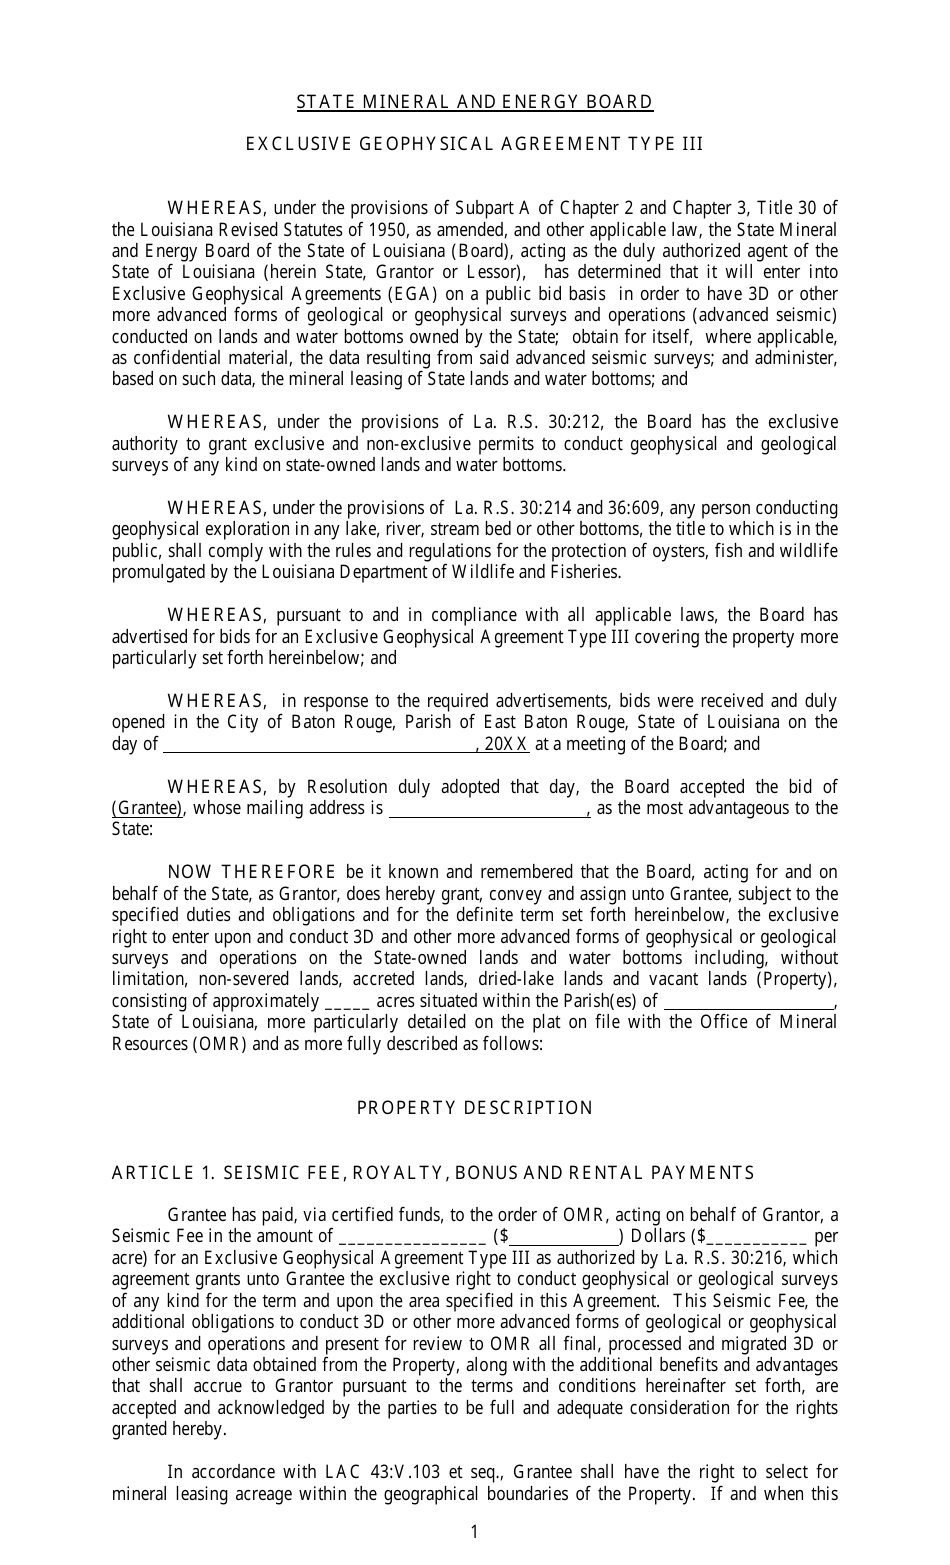 Exclusive Geophysical Agreement Form - Louisiana, Page 1